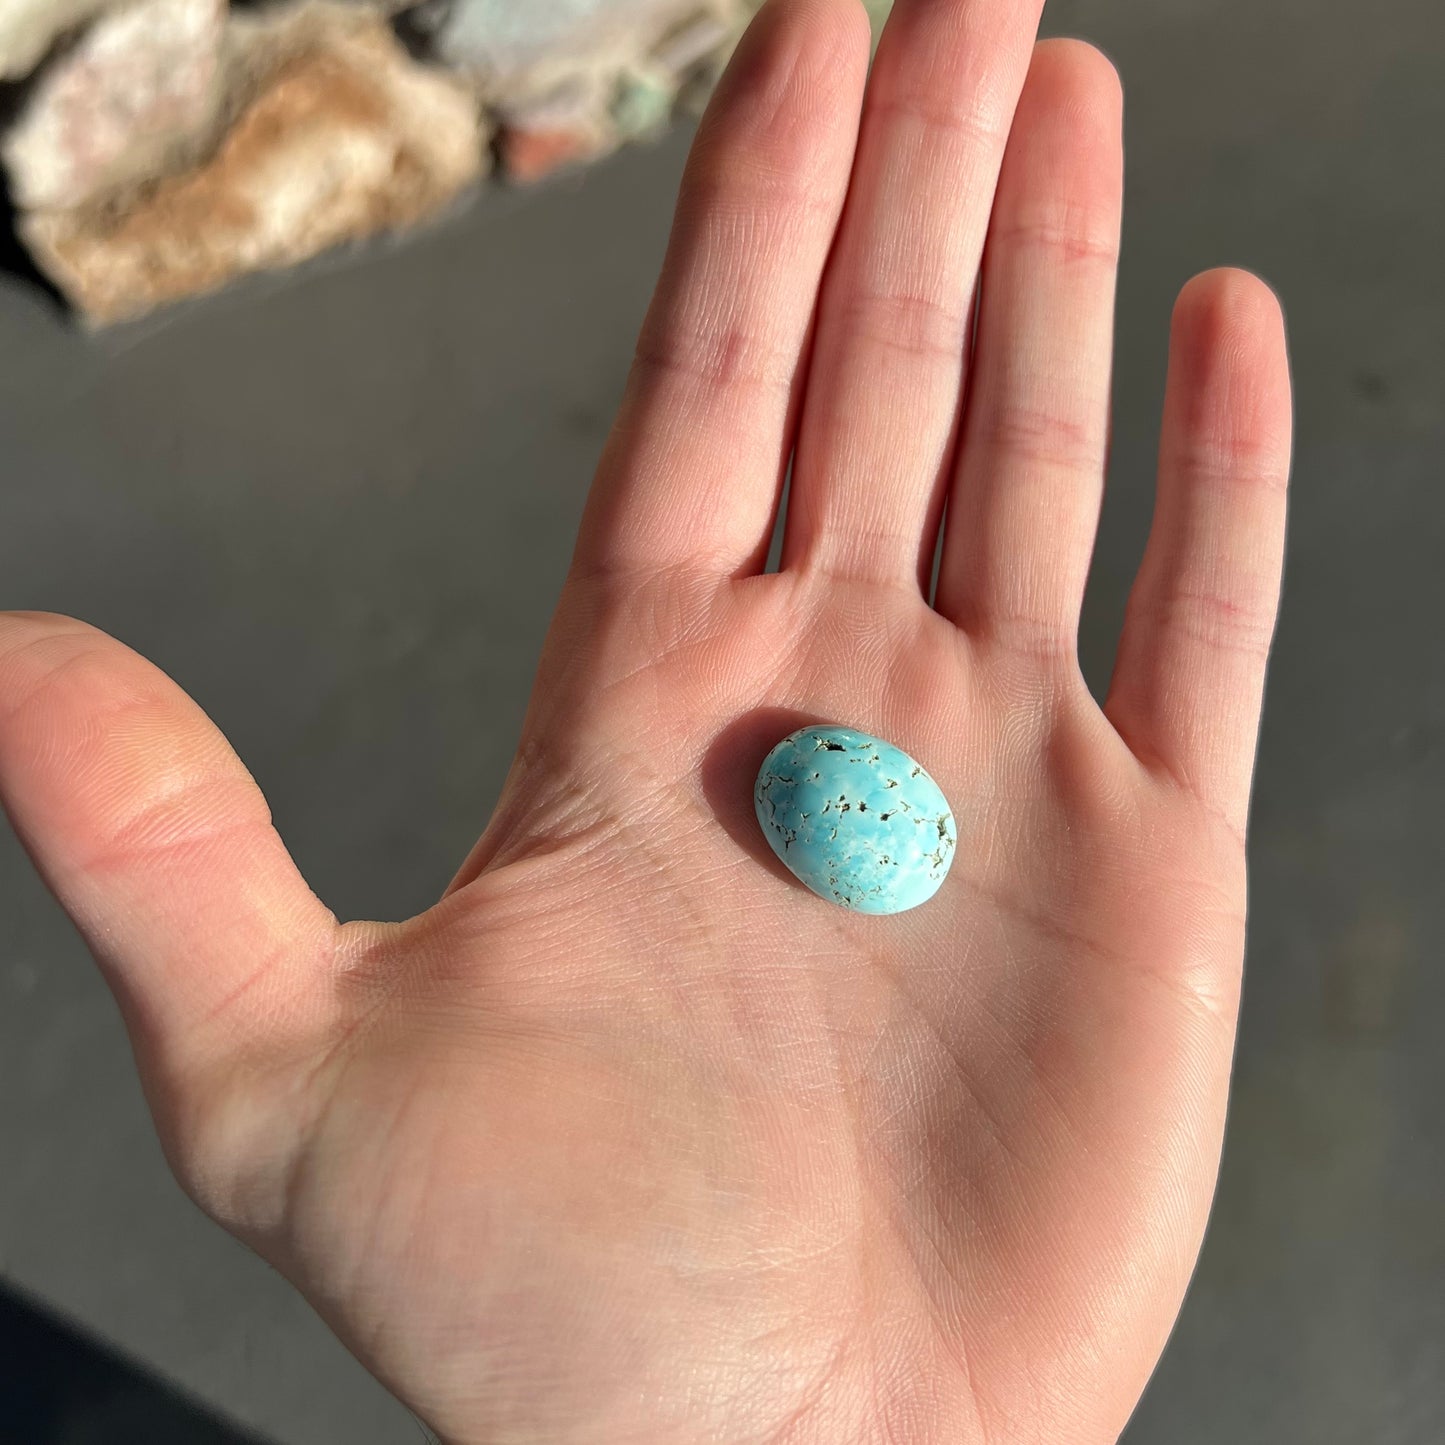 A loose oval cut turquoise cabochon from the Sleeping Beauty Mine in Arizona.